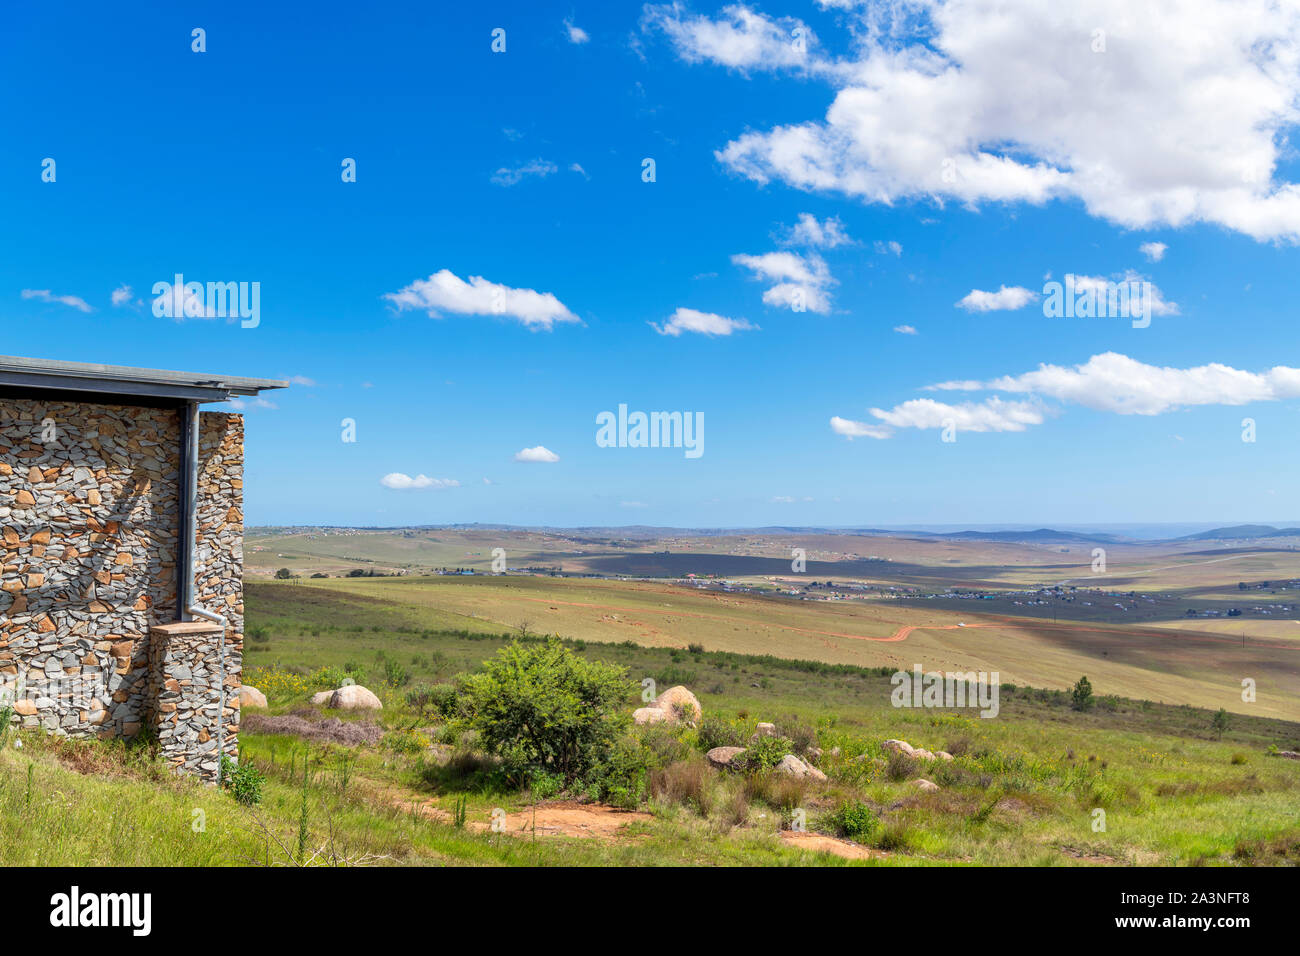 View over the countryside from the Museum in Qunu, the childhood village of Nelson Mandela, Eastern Cape, South Africa Stock Photo